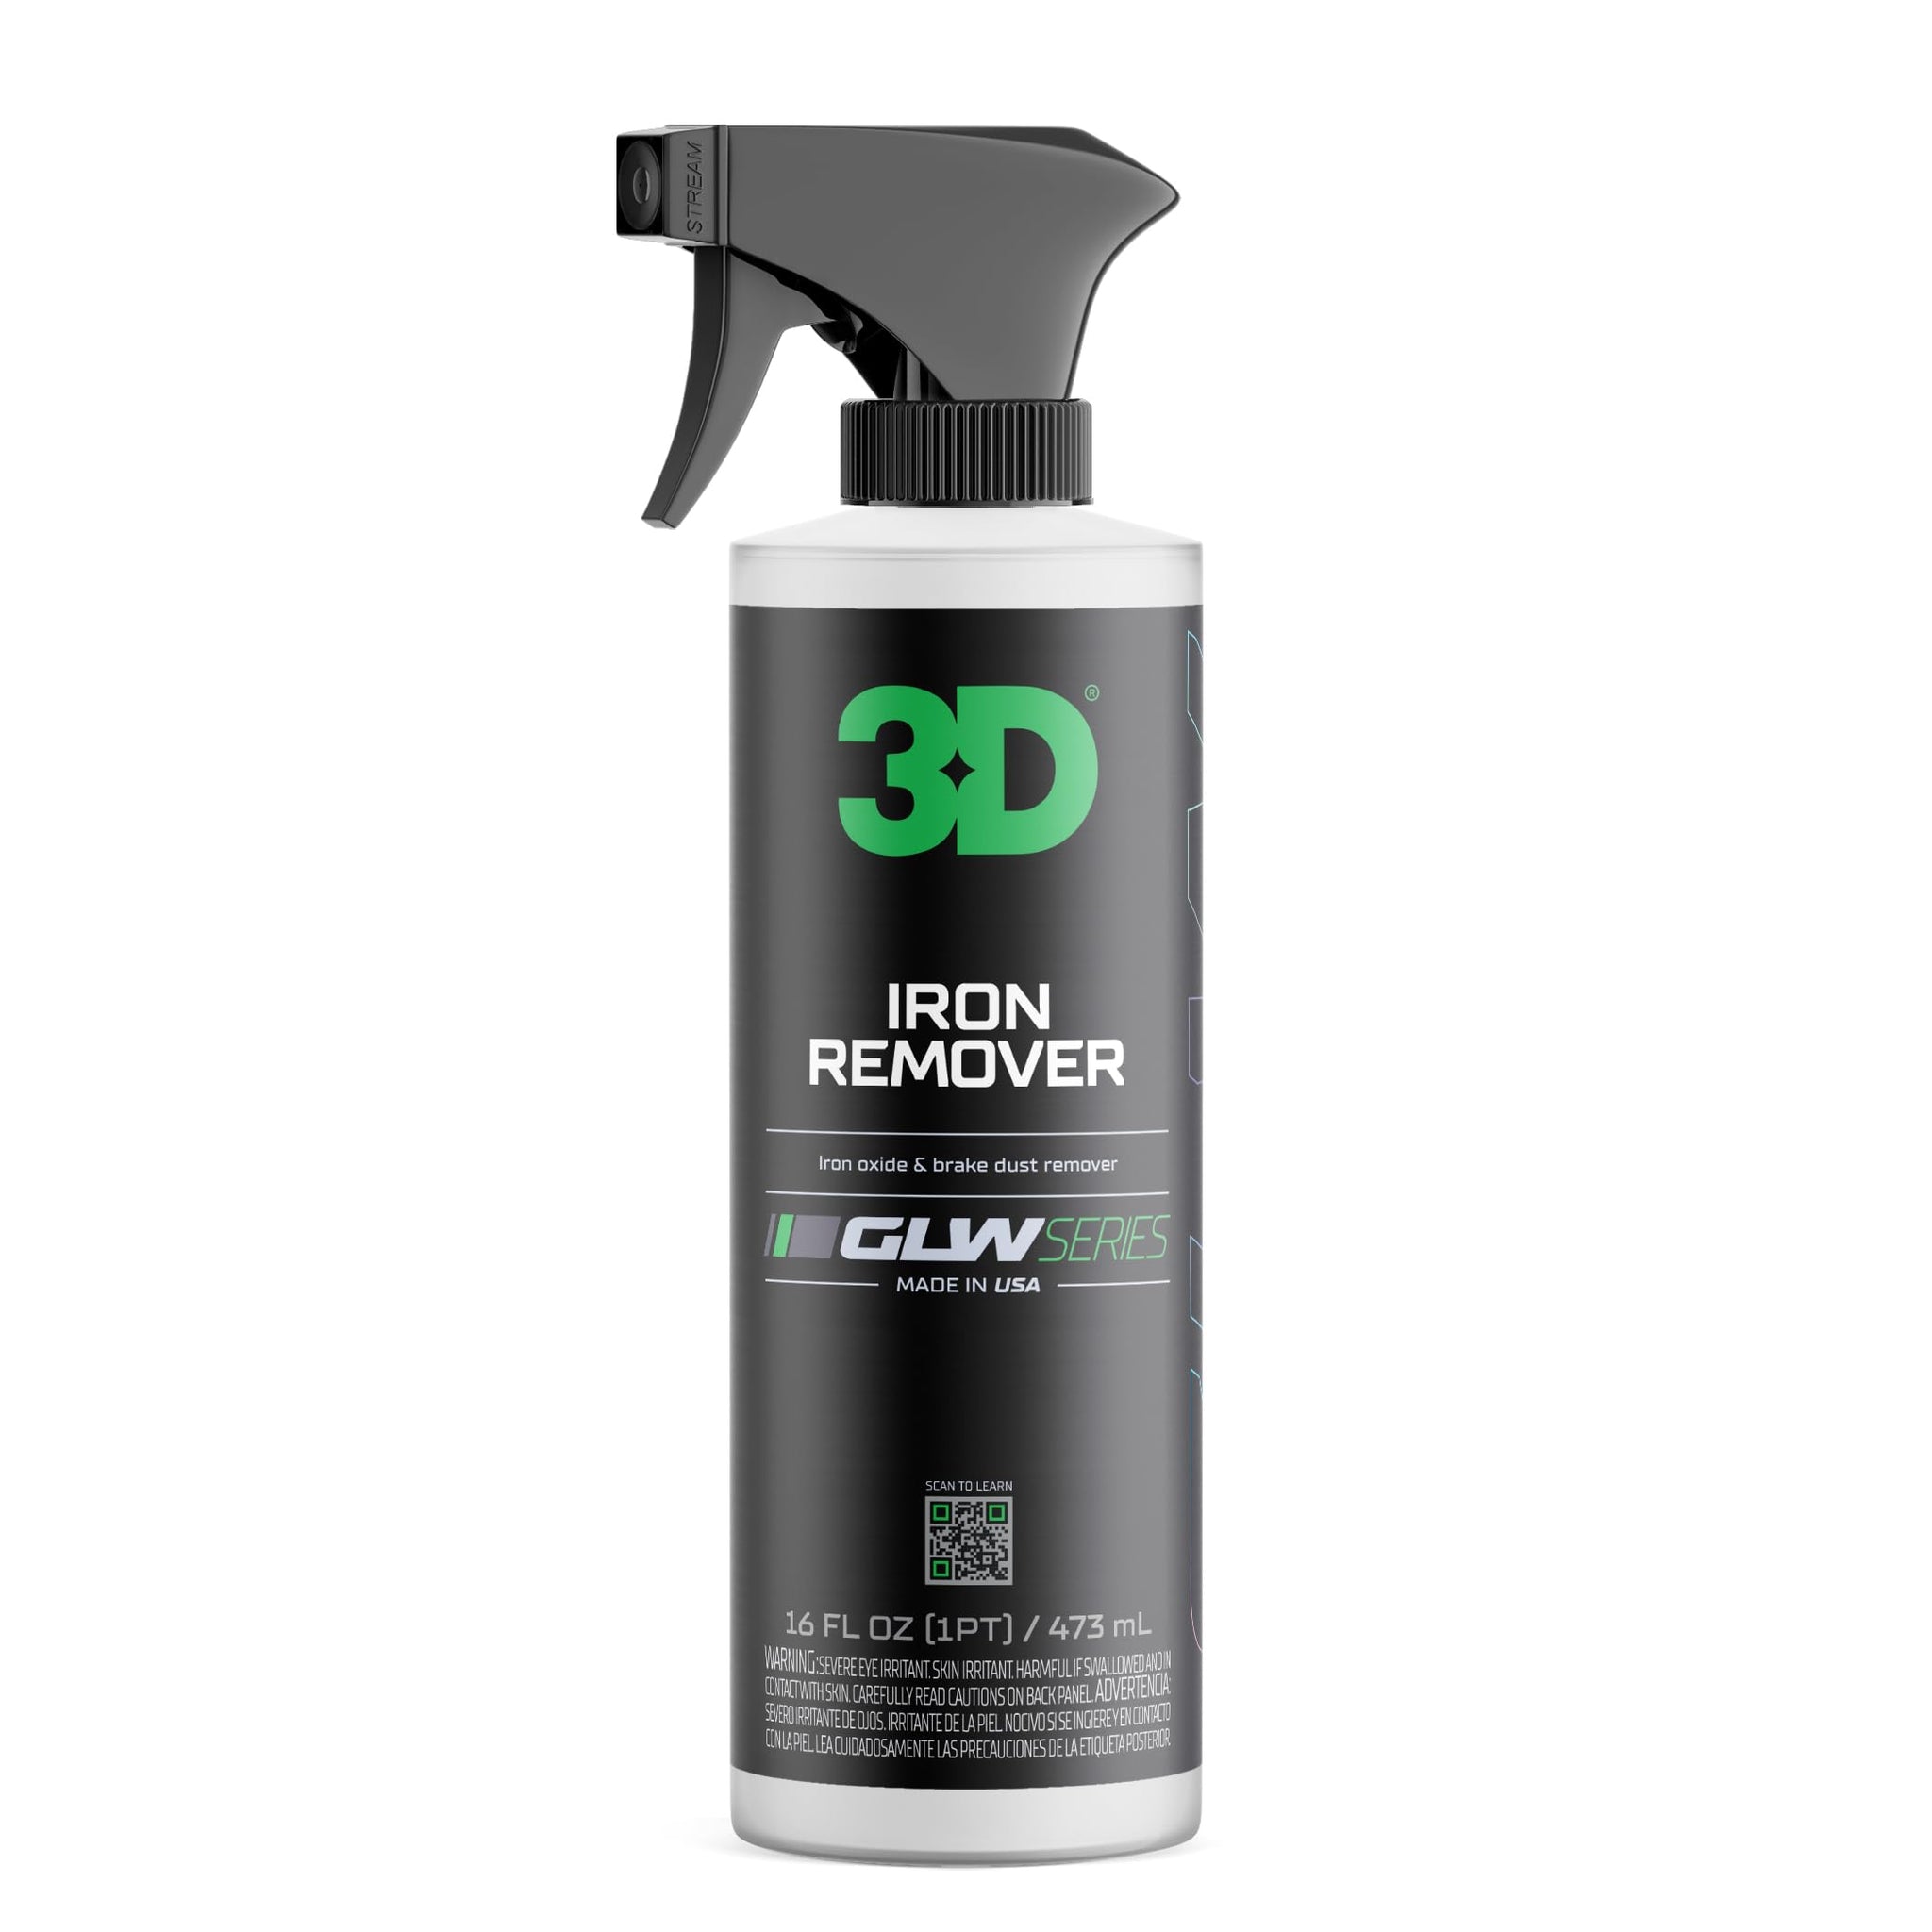  3D Iron Remover GLW Series, DIY Car Detailing, Hyper  Effective Wheel Decontamination, Removes Iron Particles, Dirt, Brake Dust, Rapid Results